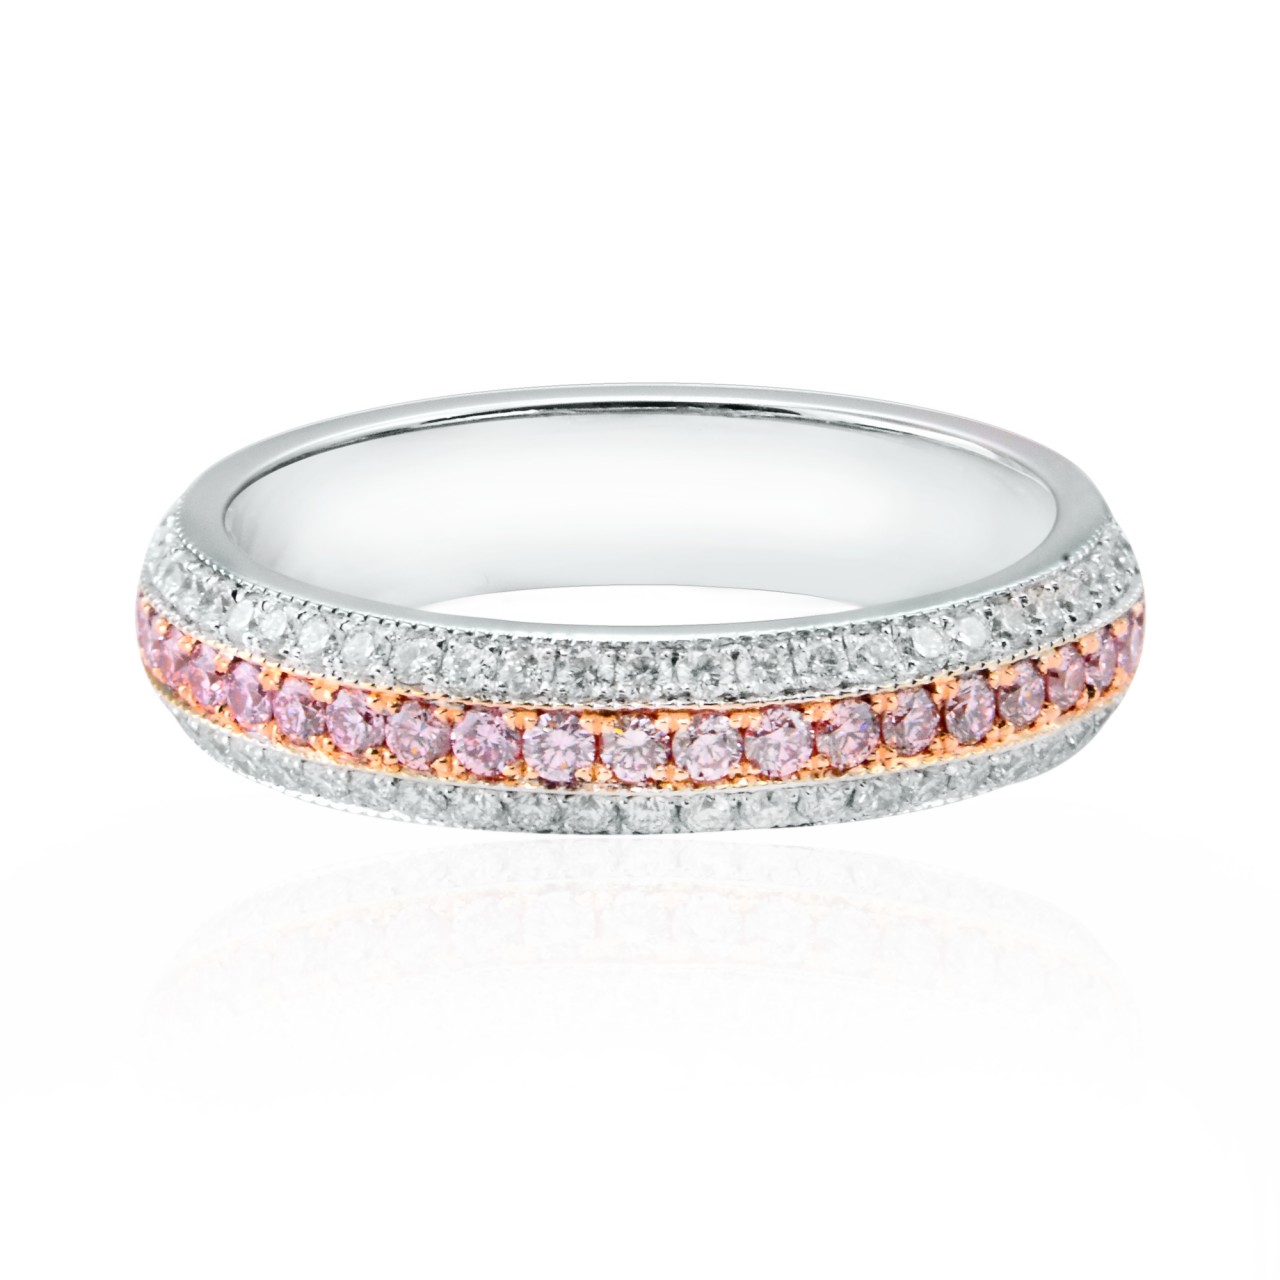 Fancy Pink and Collection Color Diamond Pave Millgrain Wedding Band ...